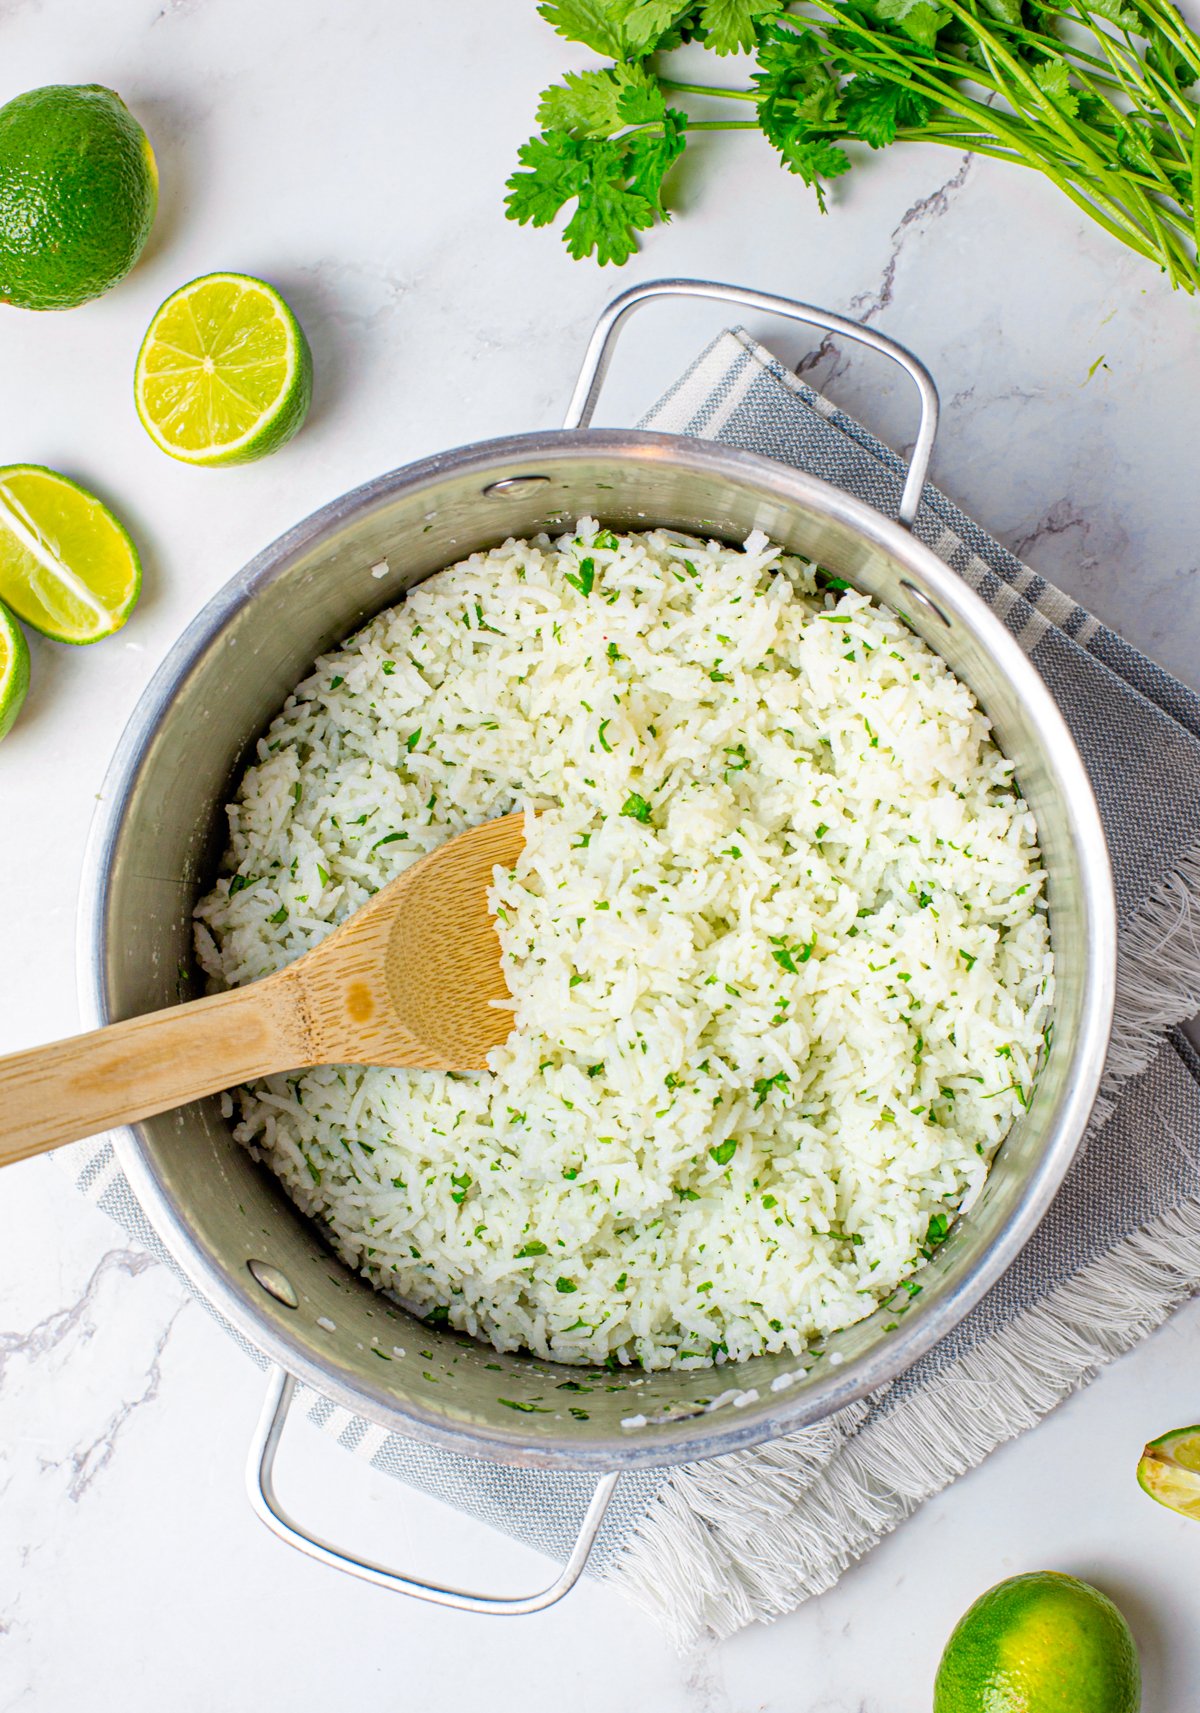 Finished rice in pan with wooden spoon surrounded by limes and cilantro